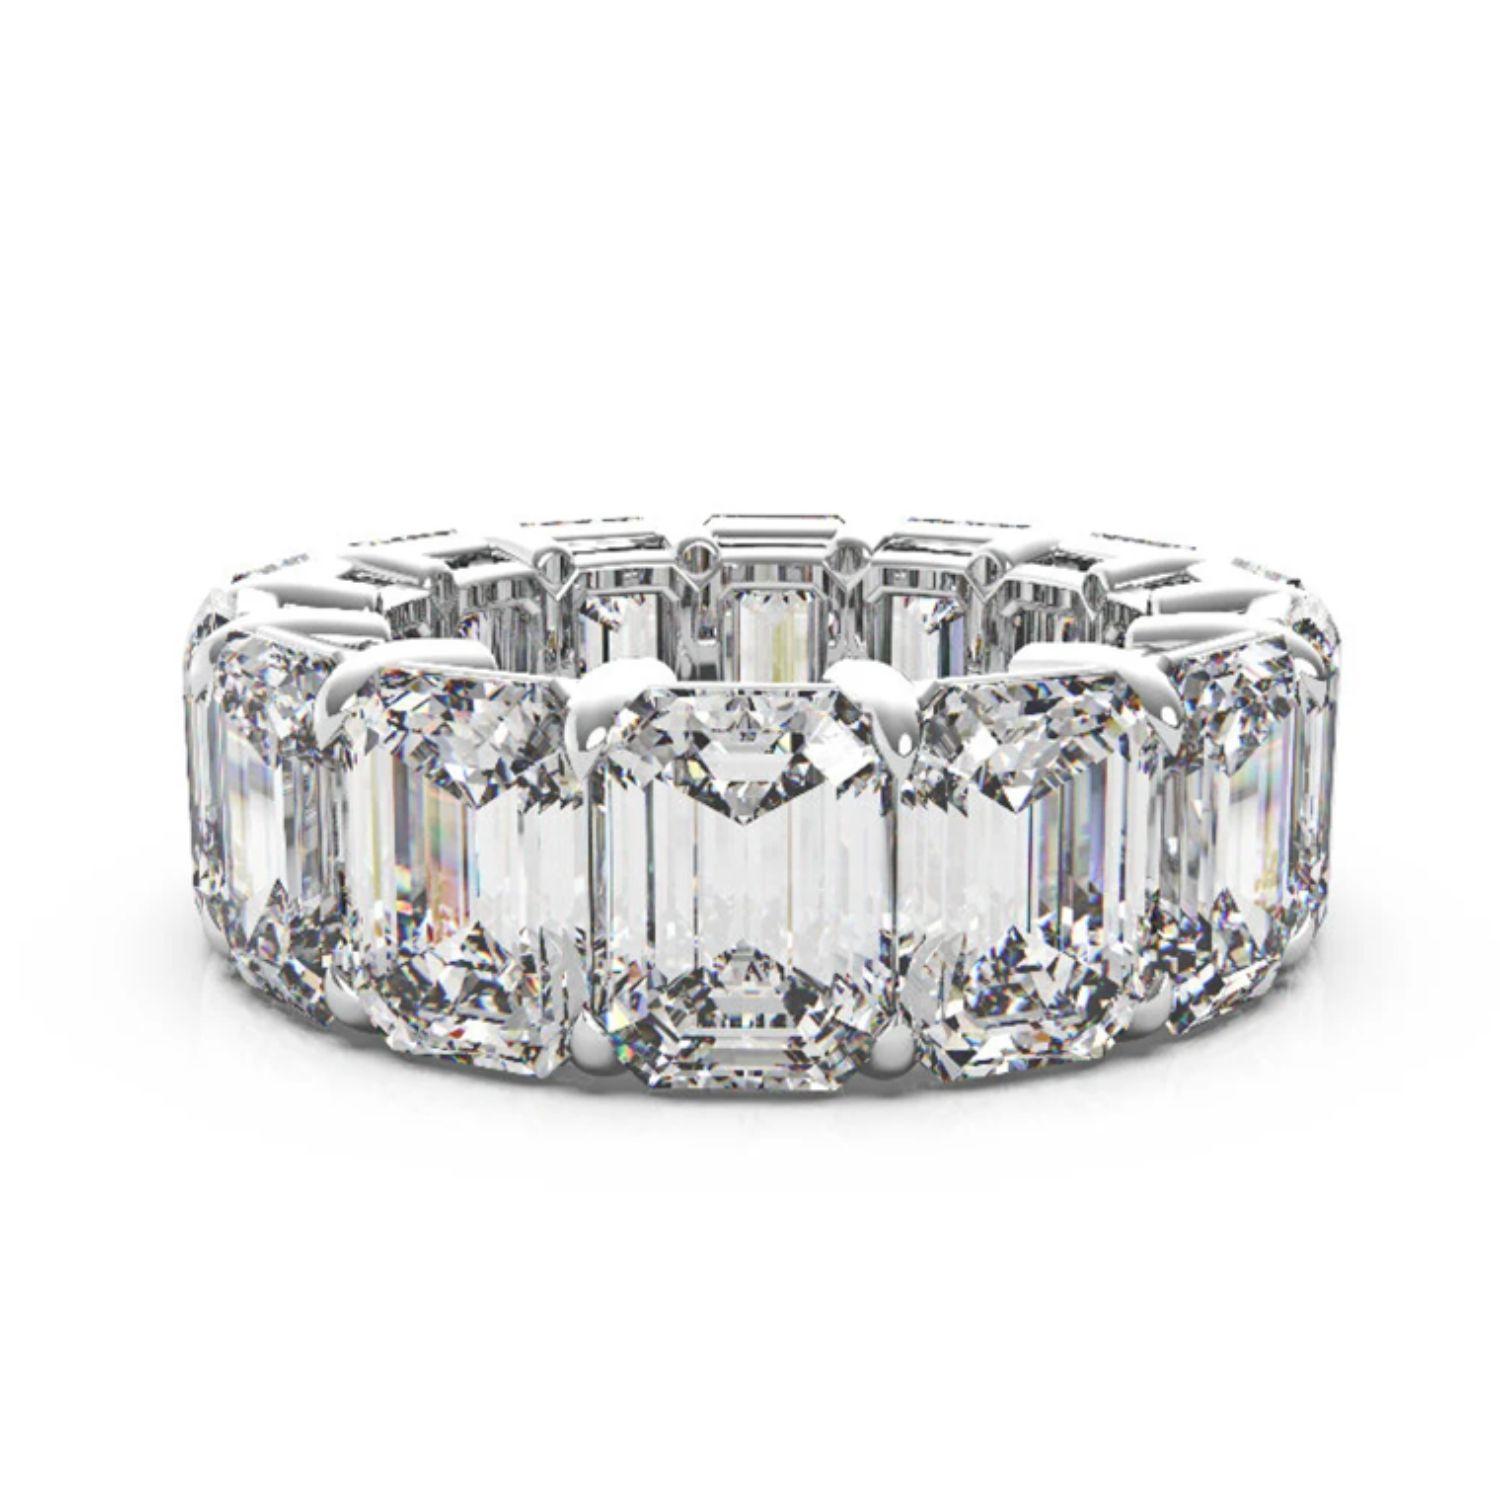 Make a statement with this stunning 1 carat each, emerald cut Diamond eternity band. The band will be custom made - US size 7, 12 pieces of 1 carat each will be used. All diamonds are certified - I/J color, VVS/VS quality. Set in 18K White Gold. The